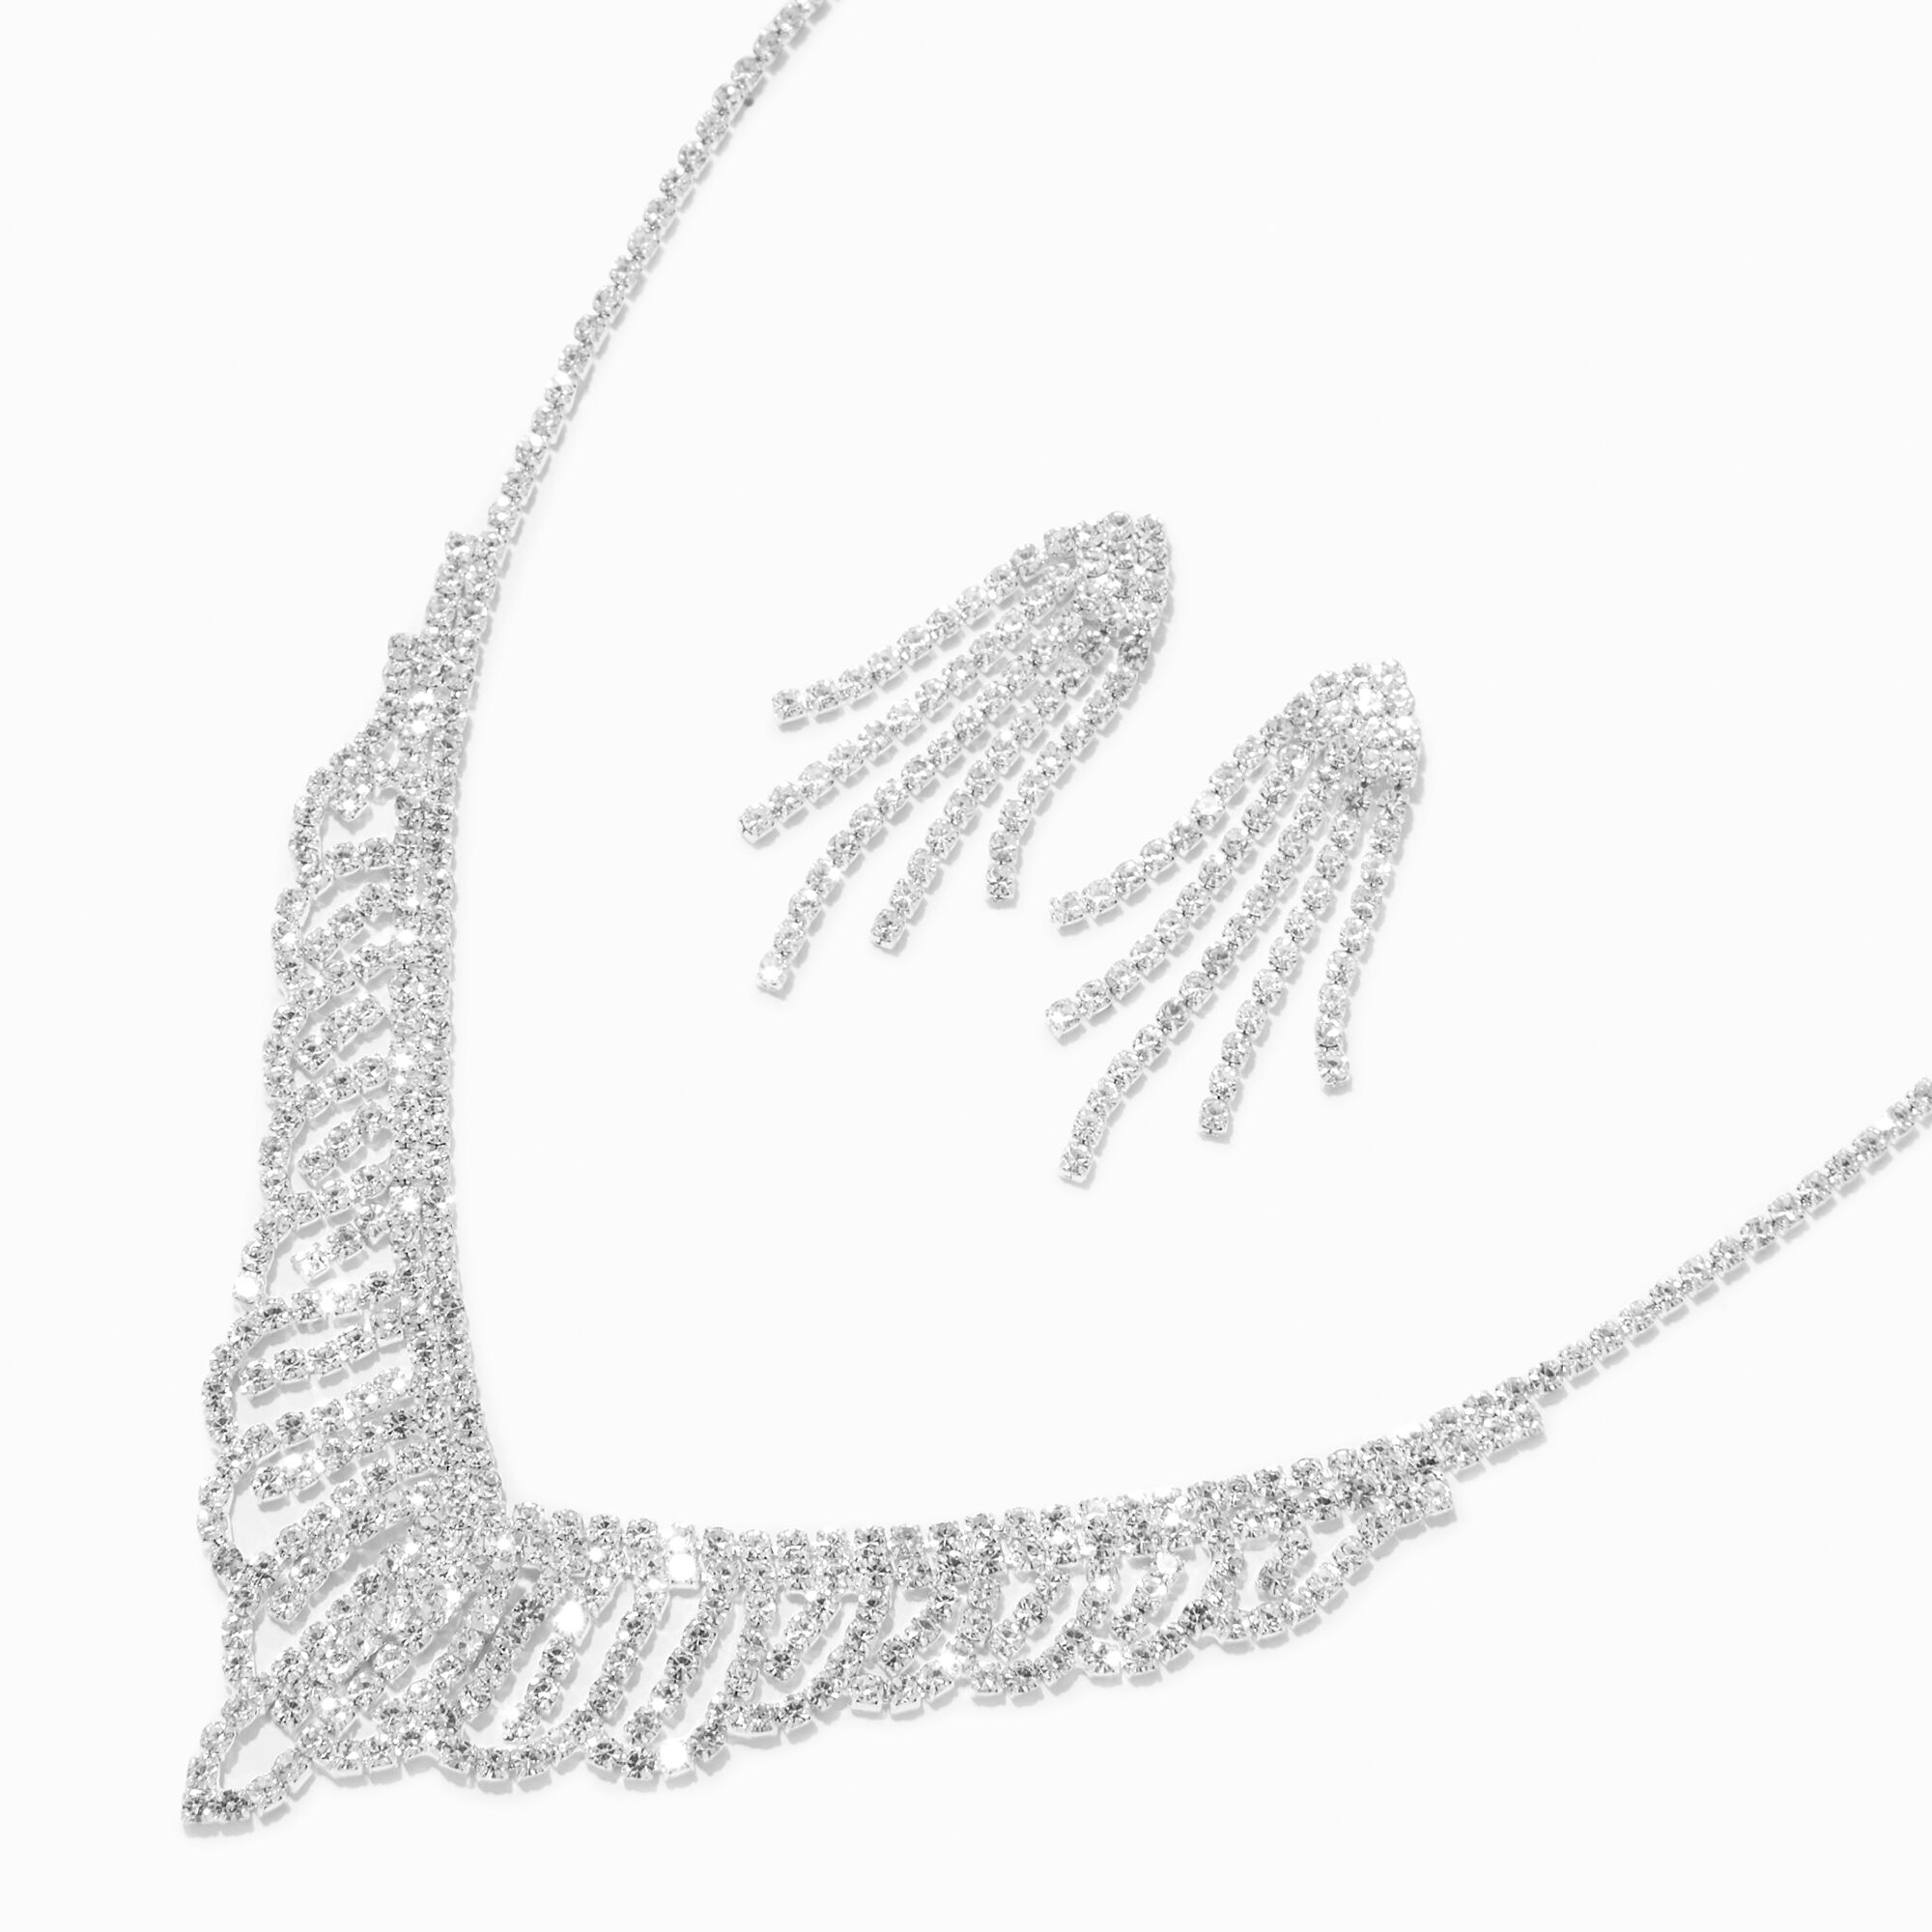 View Claires Tone Crystal Short Fringe Jewelry Set 2 Pack Silver information